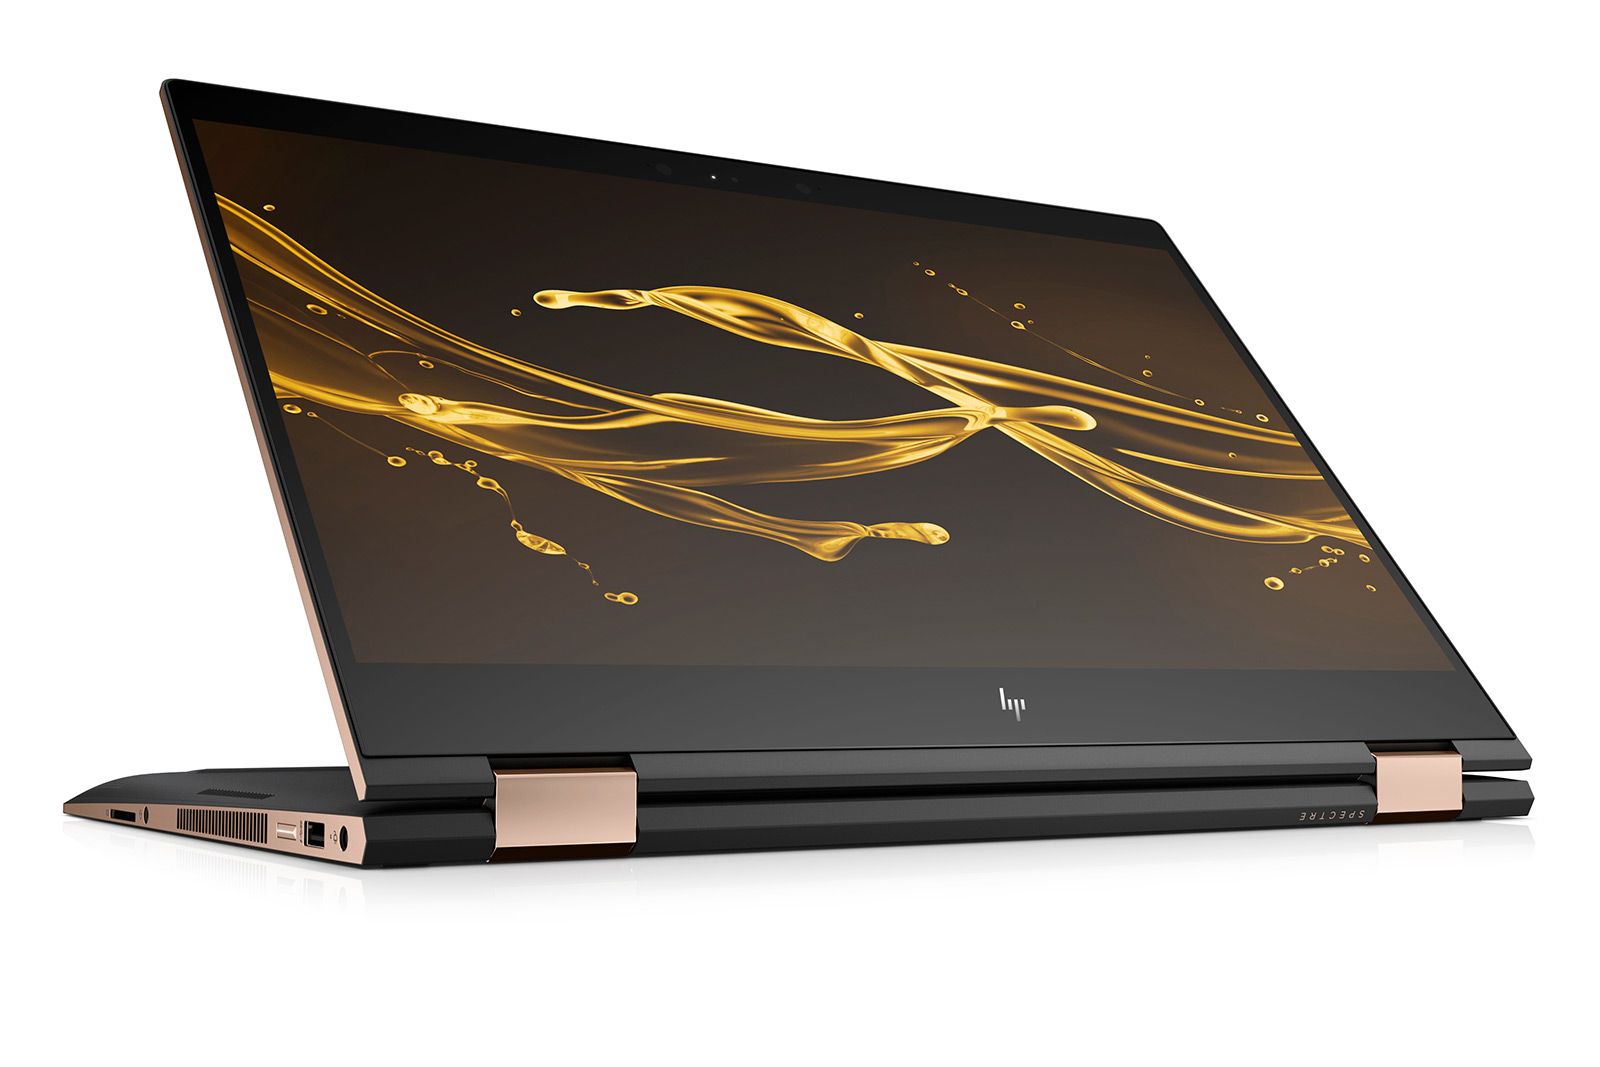 HP Spectre 15 x360 is worlds most powerful convertible PC ideal for professionals on-the-go image 1